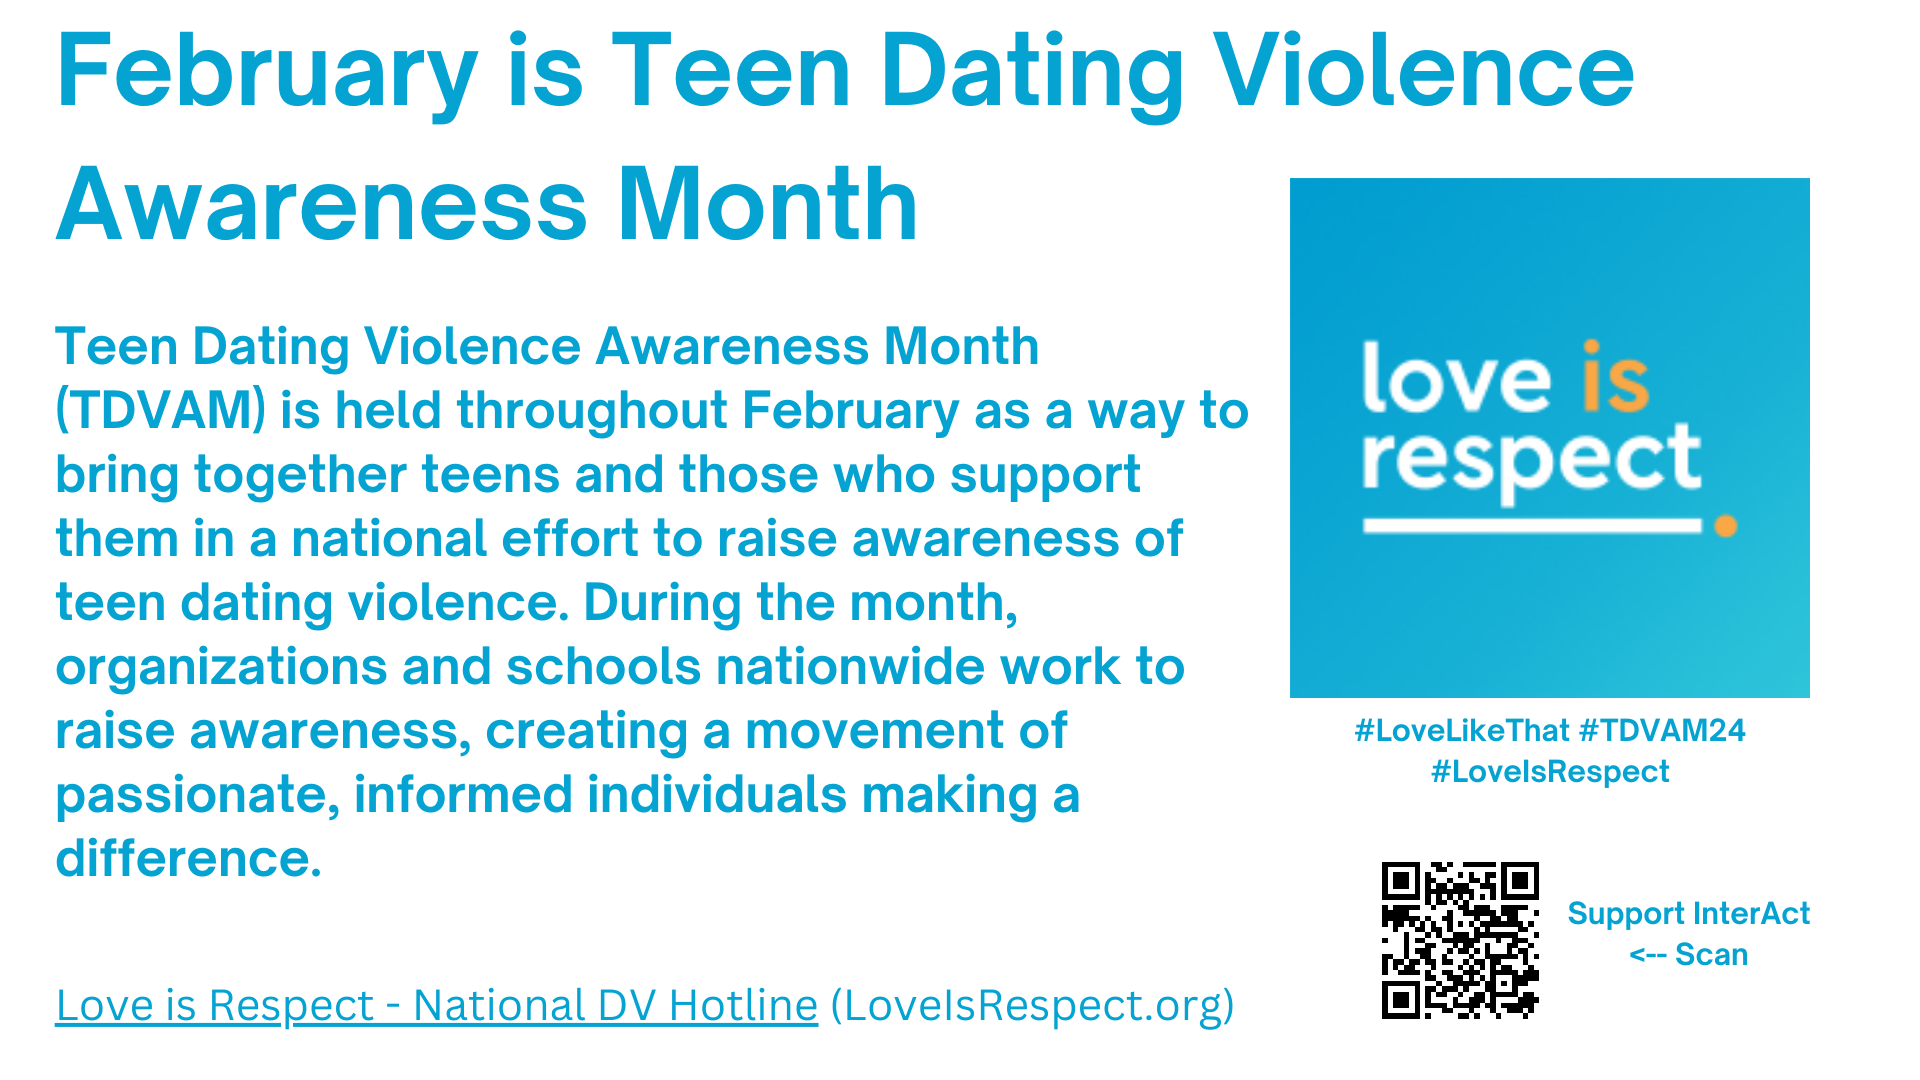 February is Teen Dating Violence Awareness Month. Teen Dating Violence Awareness Month (TDVAM) is held throughout February as a way to bring together teens and those who support them in a national effort to raise awareness of teen dating violence. During the month, organizations and schools nationwide work to raise awareness, creating a movement of passionate, informed individuals making a difference.